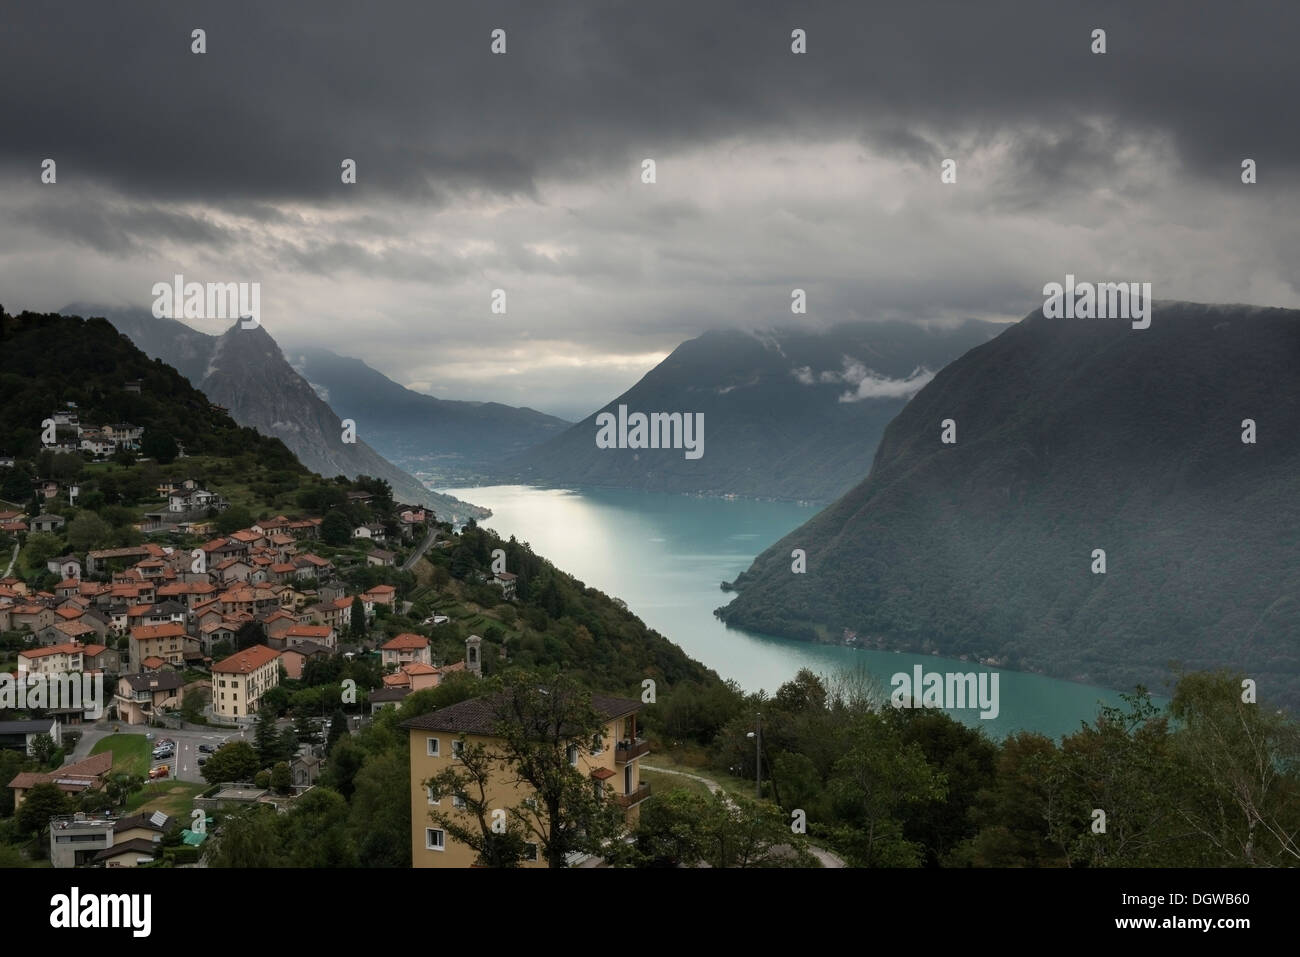 Bré VIllage viewed from Mount Bre, Gulf of Lugano and the Alps. Canton Ticino, Switzerland Stock Photo